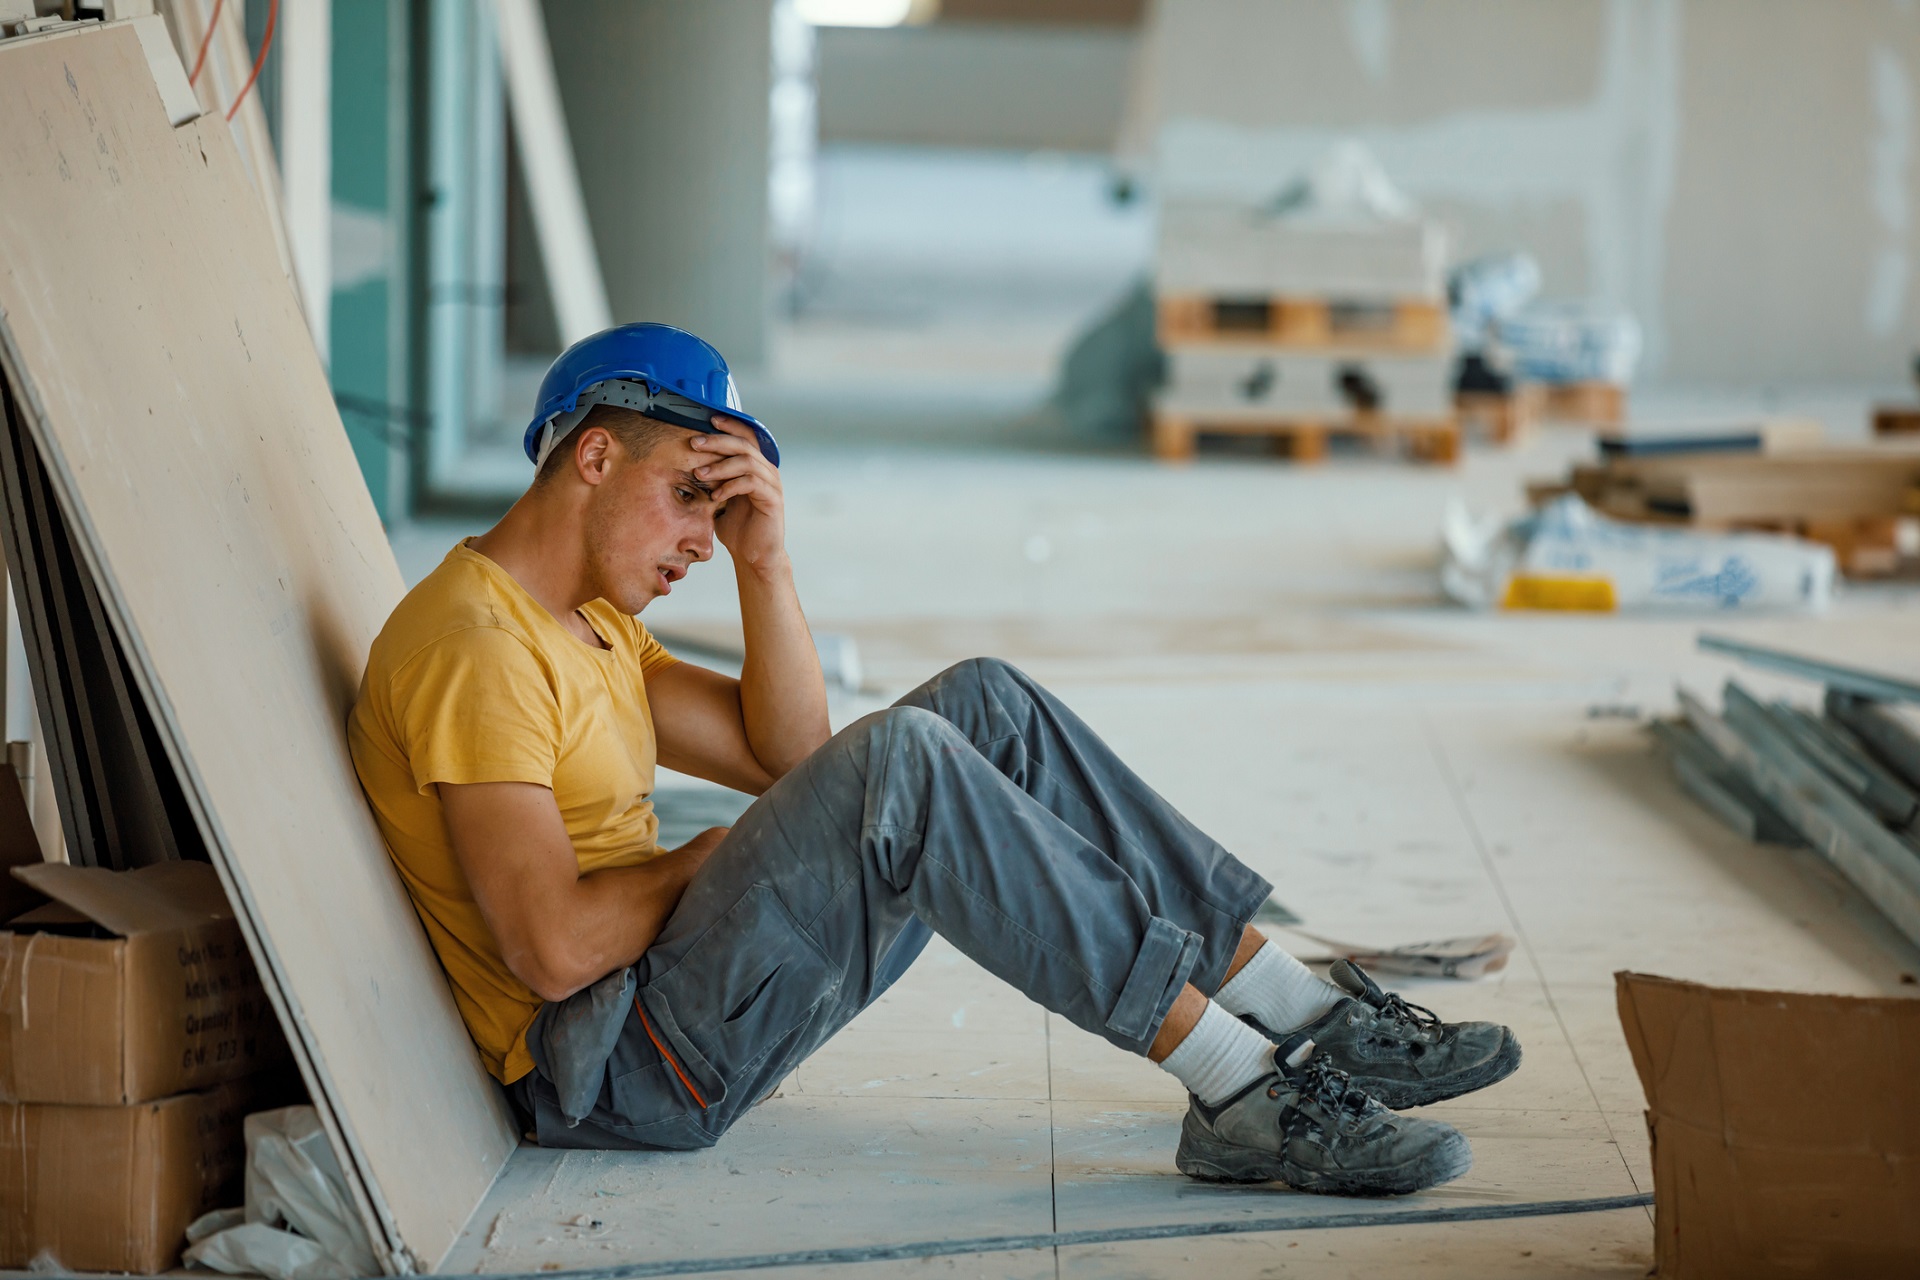 Managing Stress & Anxiety at Work: Advice for Carpenters